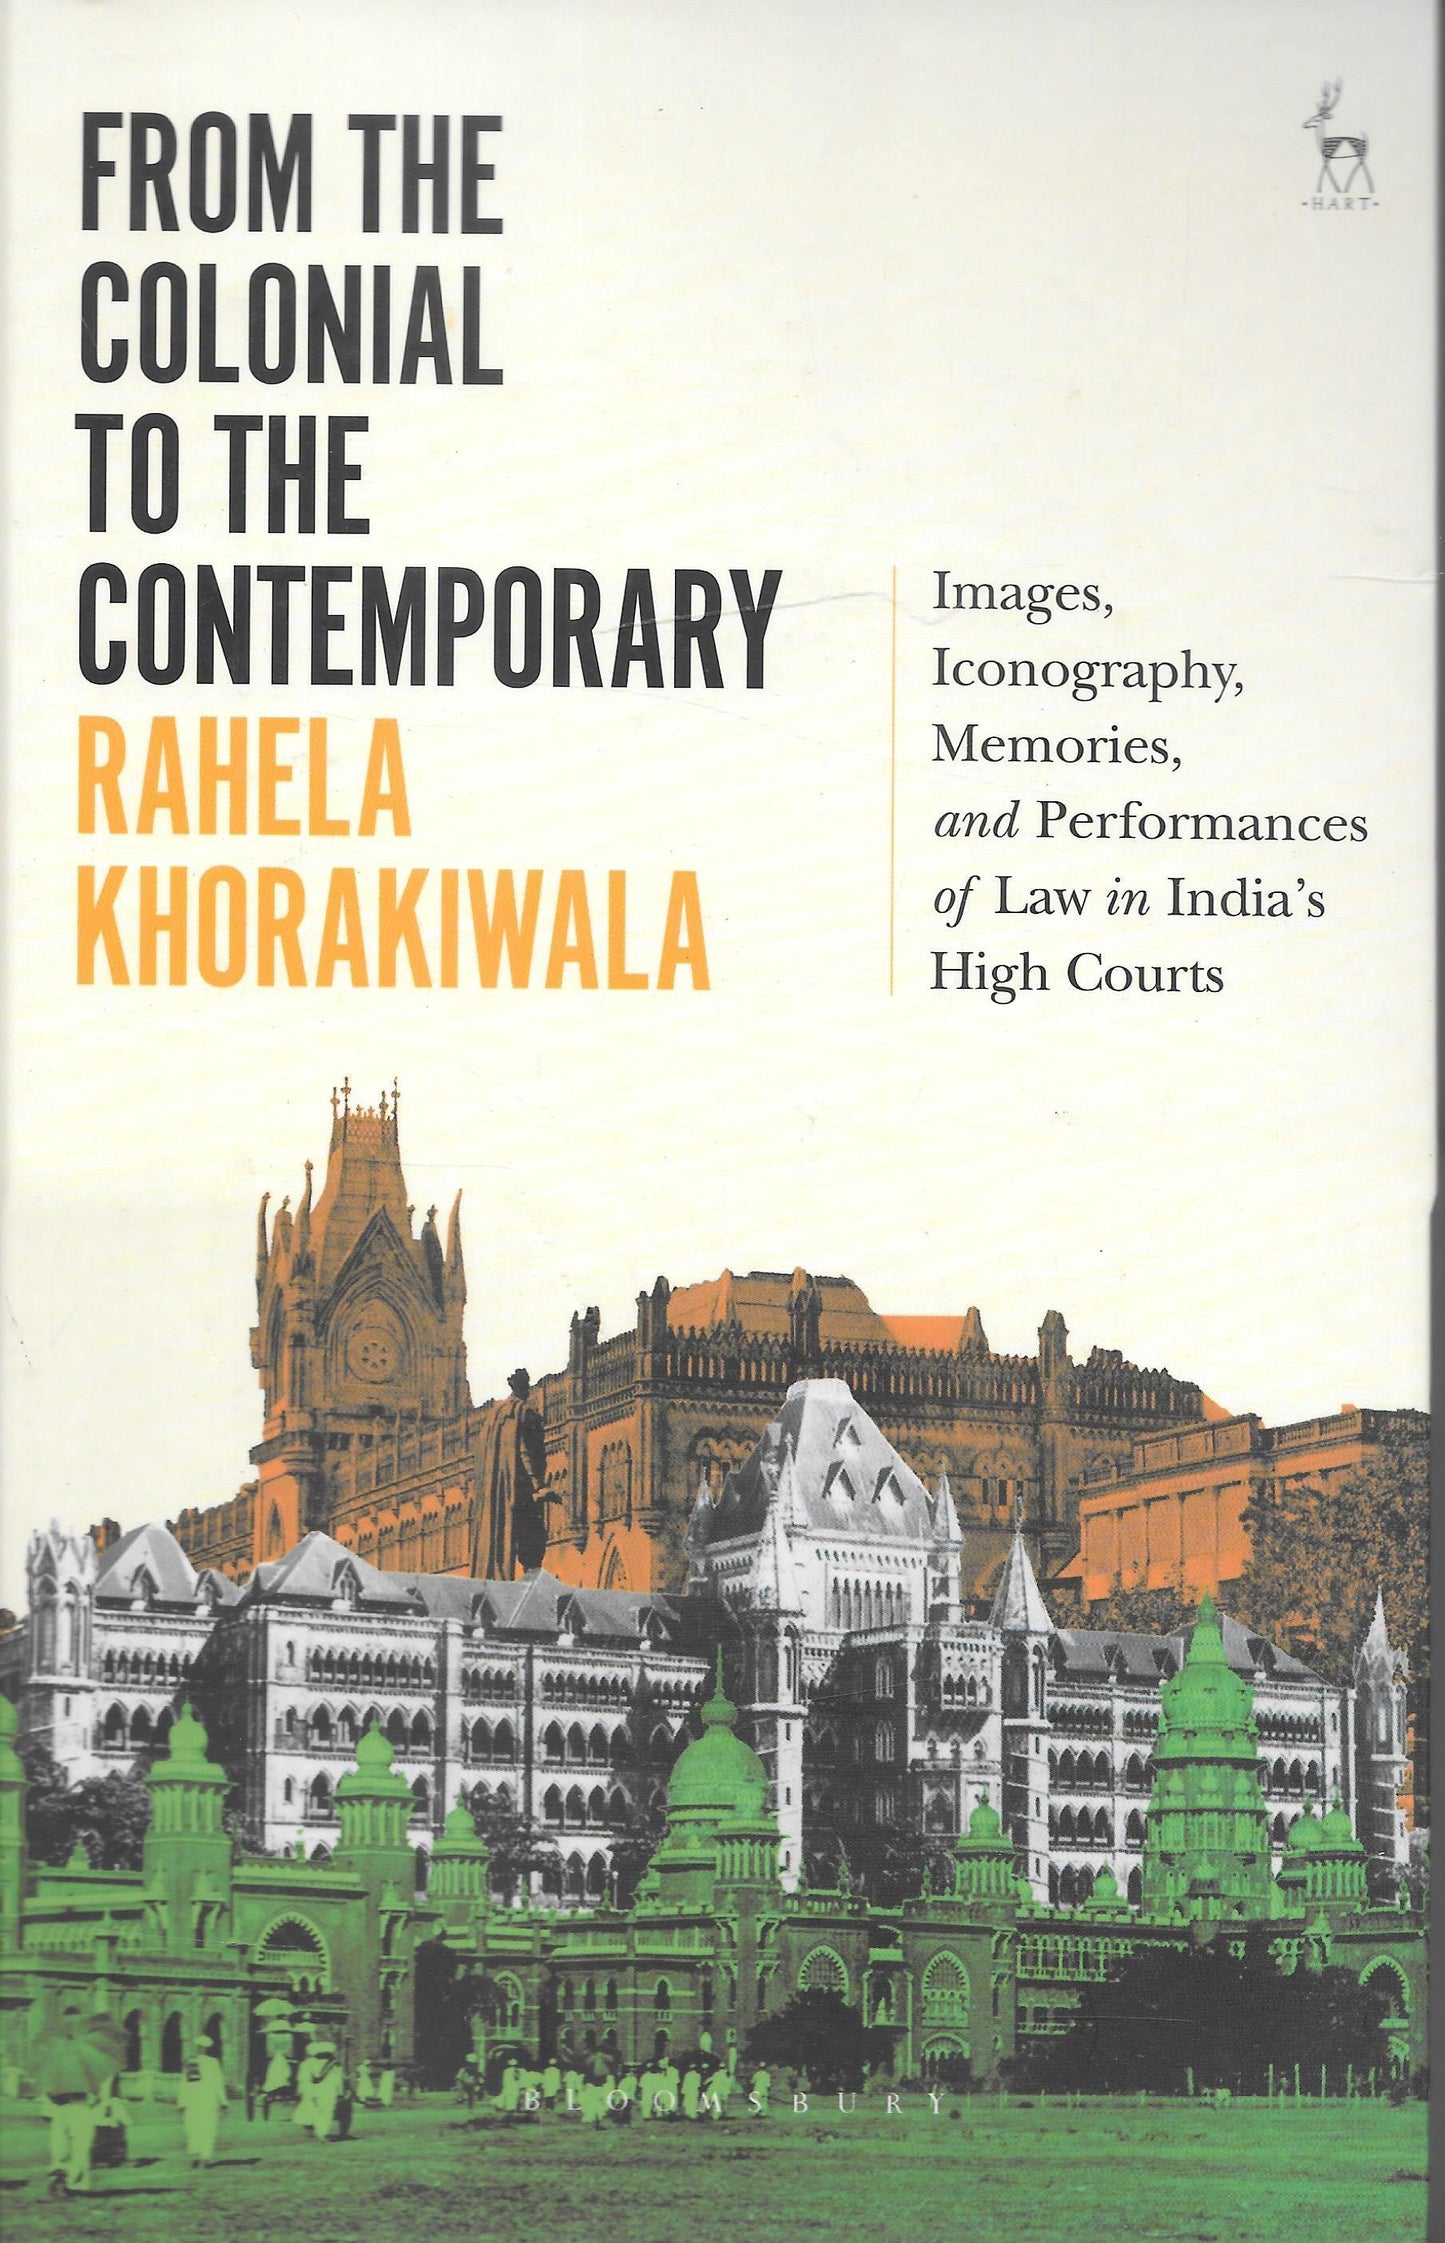 From the Colonial to the Contemporary - Images, Iconography, Memories, and performances of law in India's High Courts by Rahela Khorakiwala